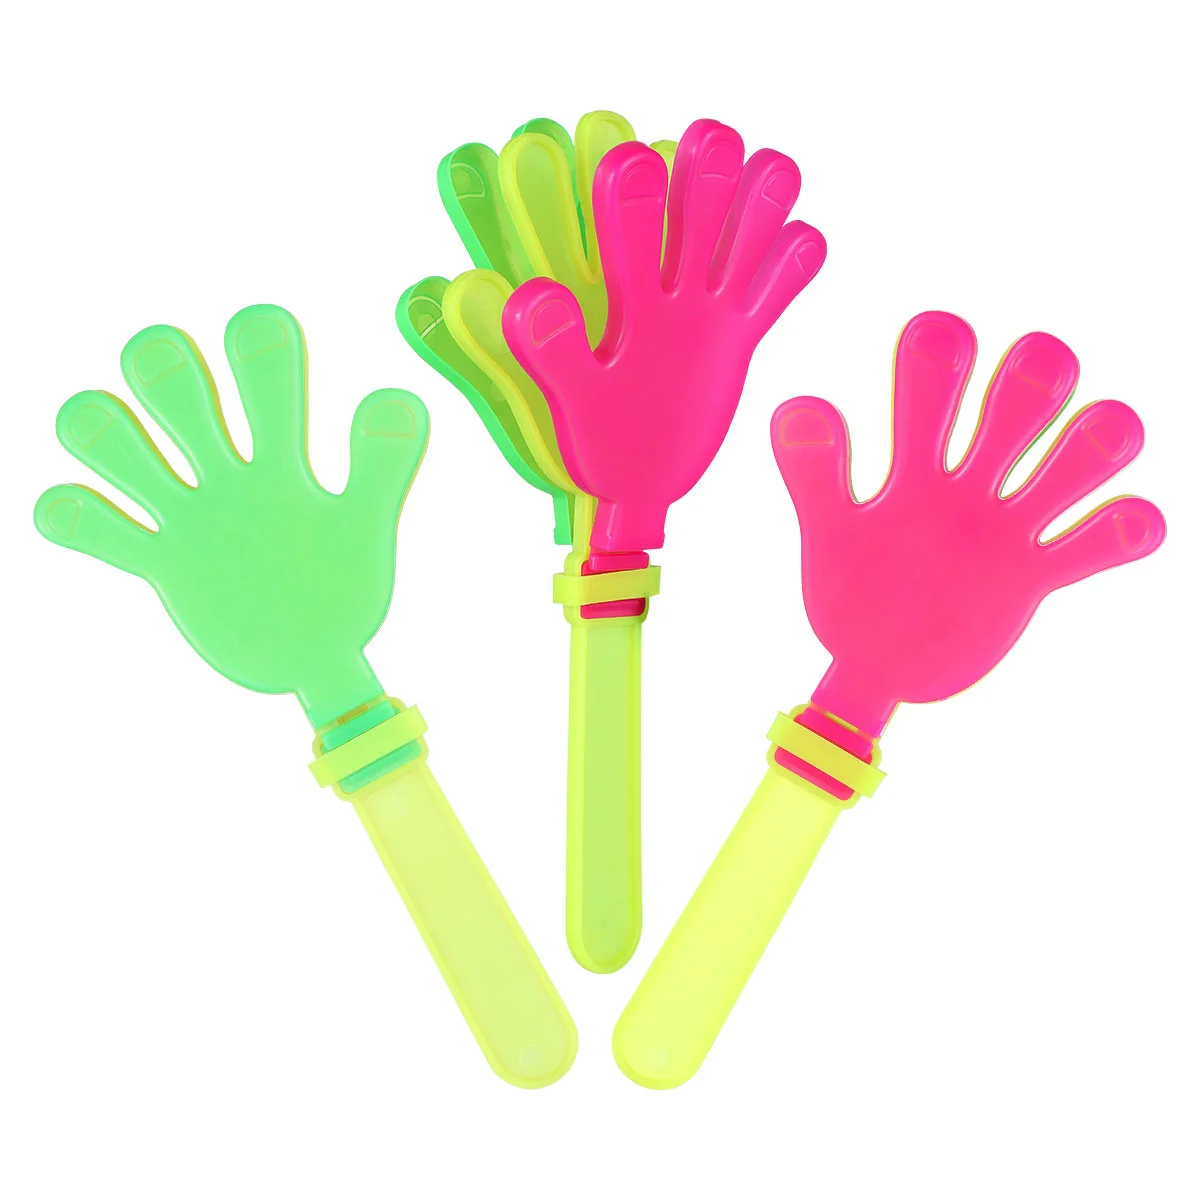 

Hand Makers Noise Clappers Noisemakers Hands Party Favors Clackers Clapping Clap Clapper Cheer Props Device Funny Applause Toy